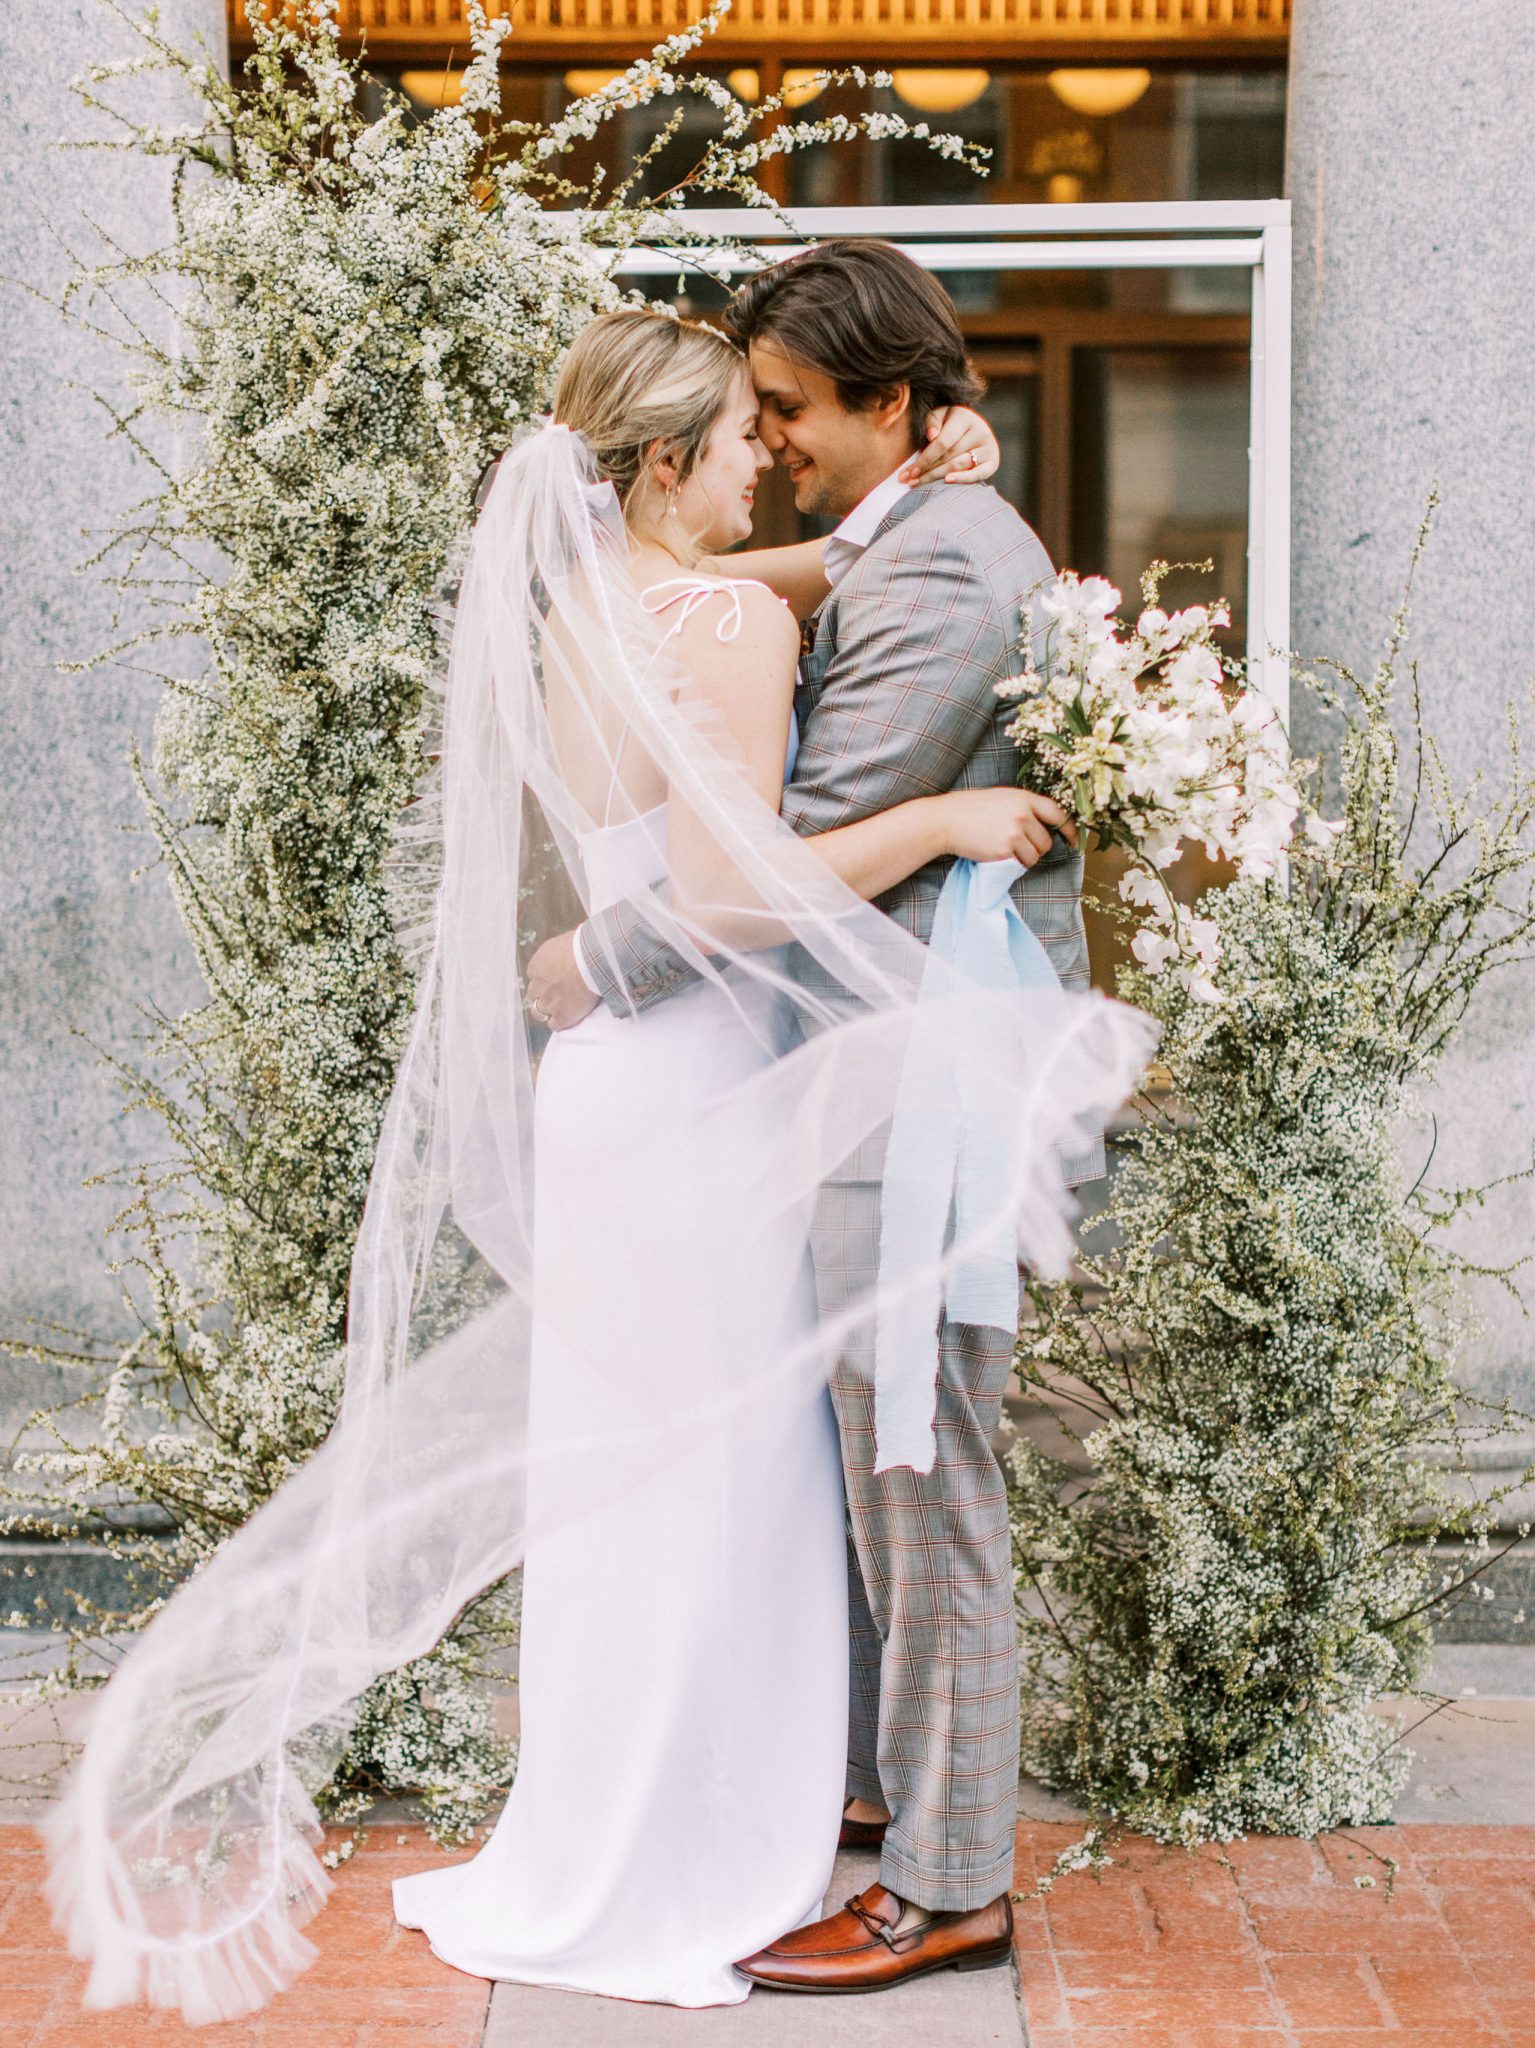 Modern bride in a white slip dress with a flowing veil poses with her grey suit groom in front of a monochromatic floral installation